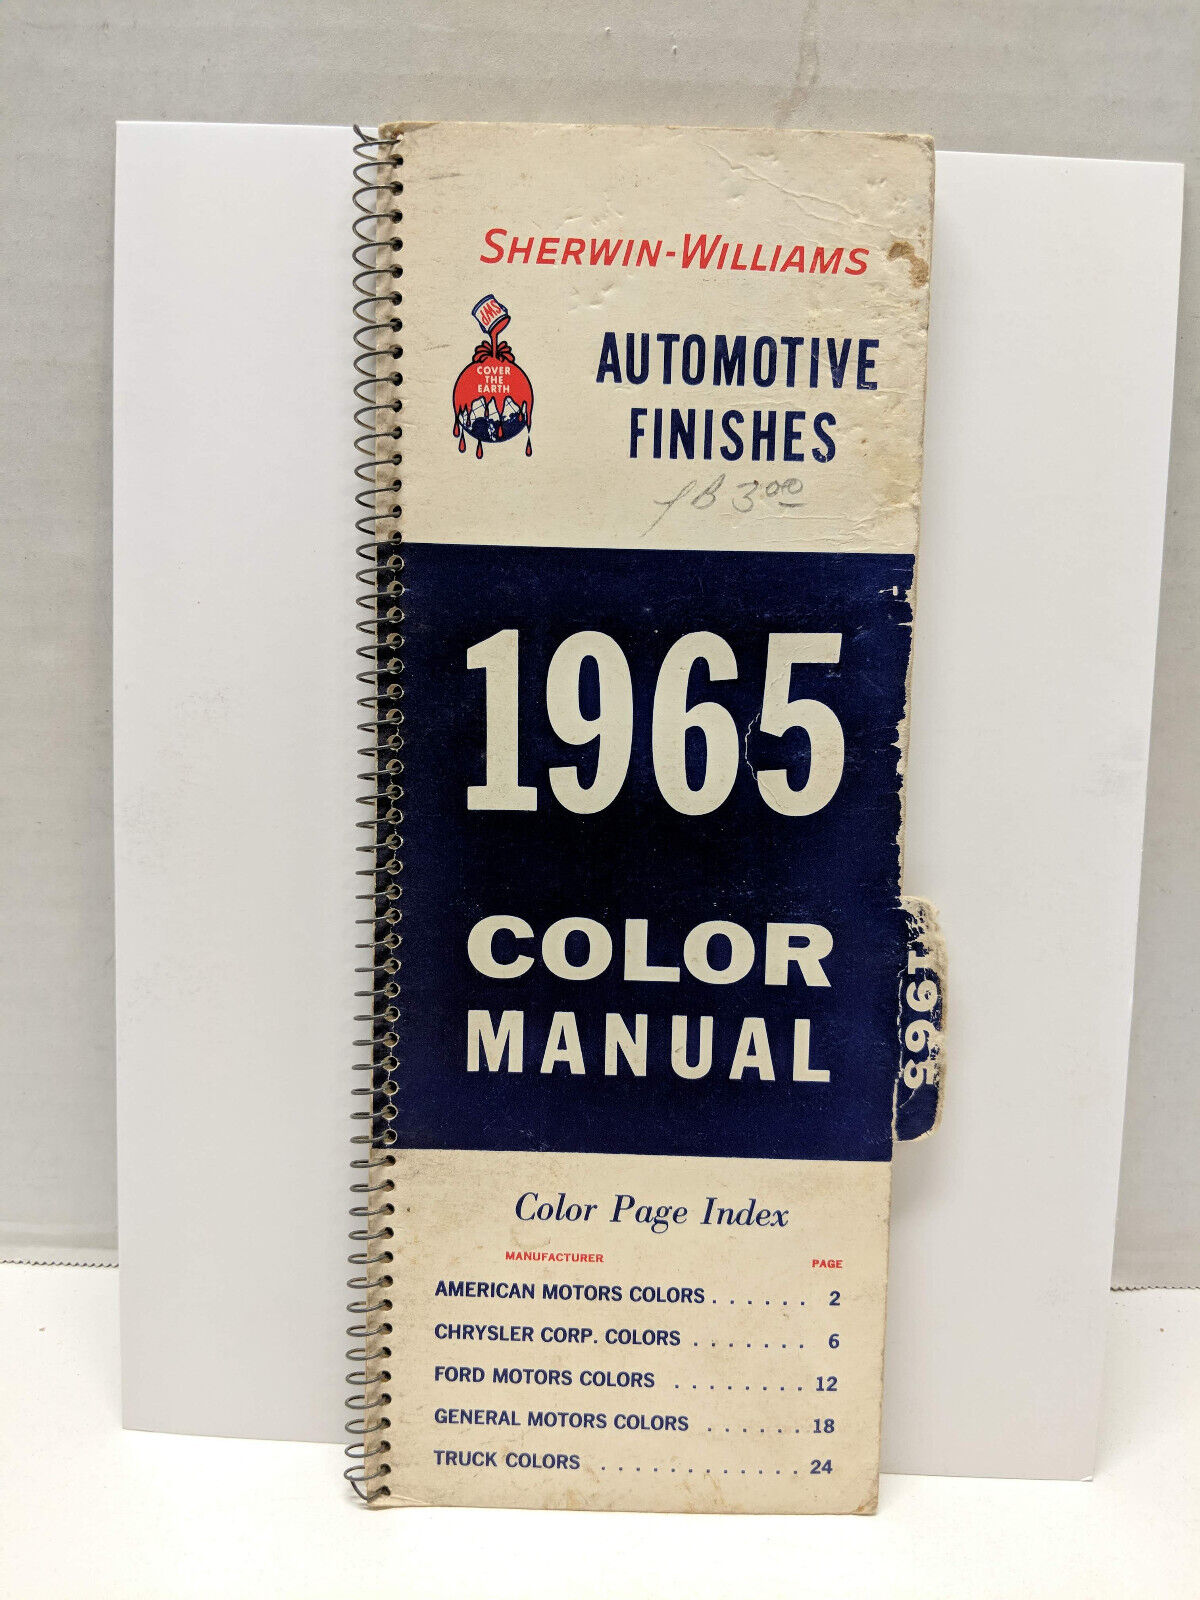 Sherwin Williams Automotive Finishes 1965 Color Manual AMC Chrysler Ford GM